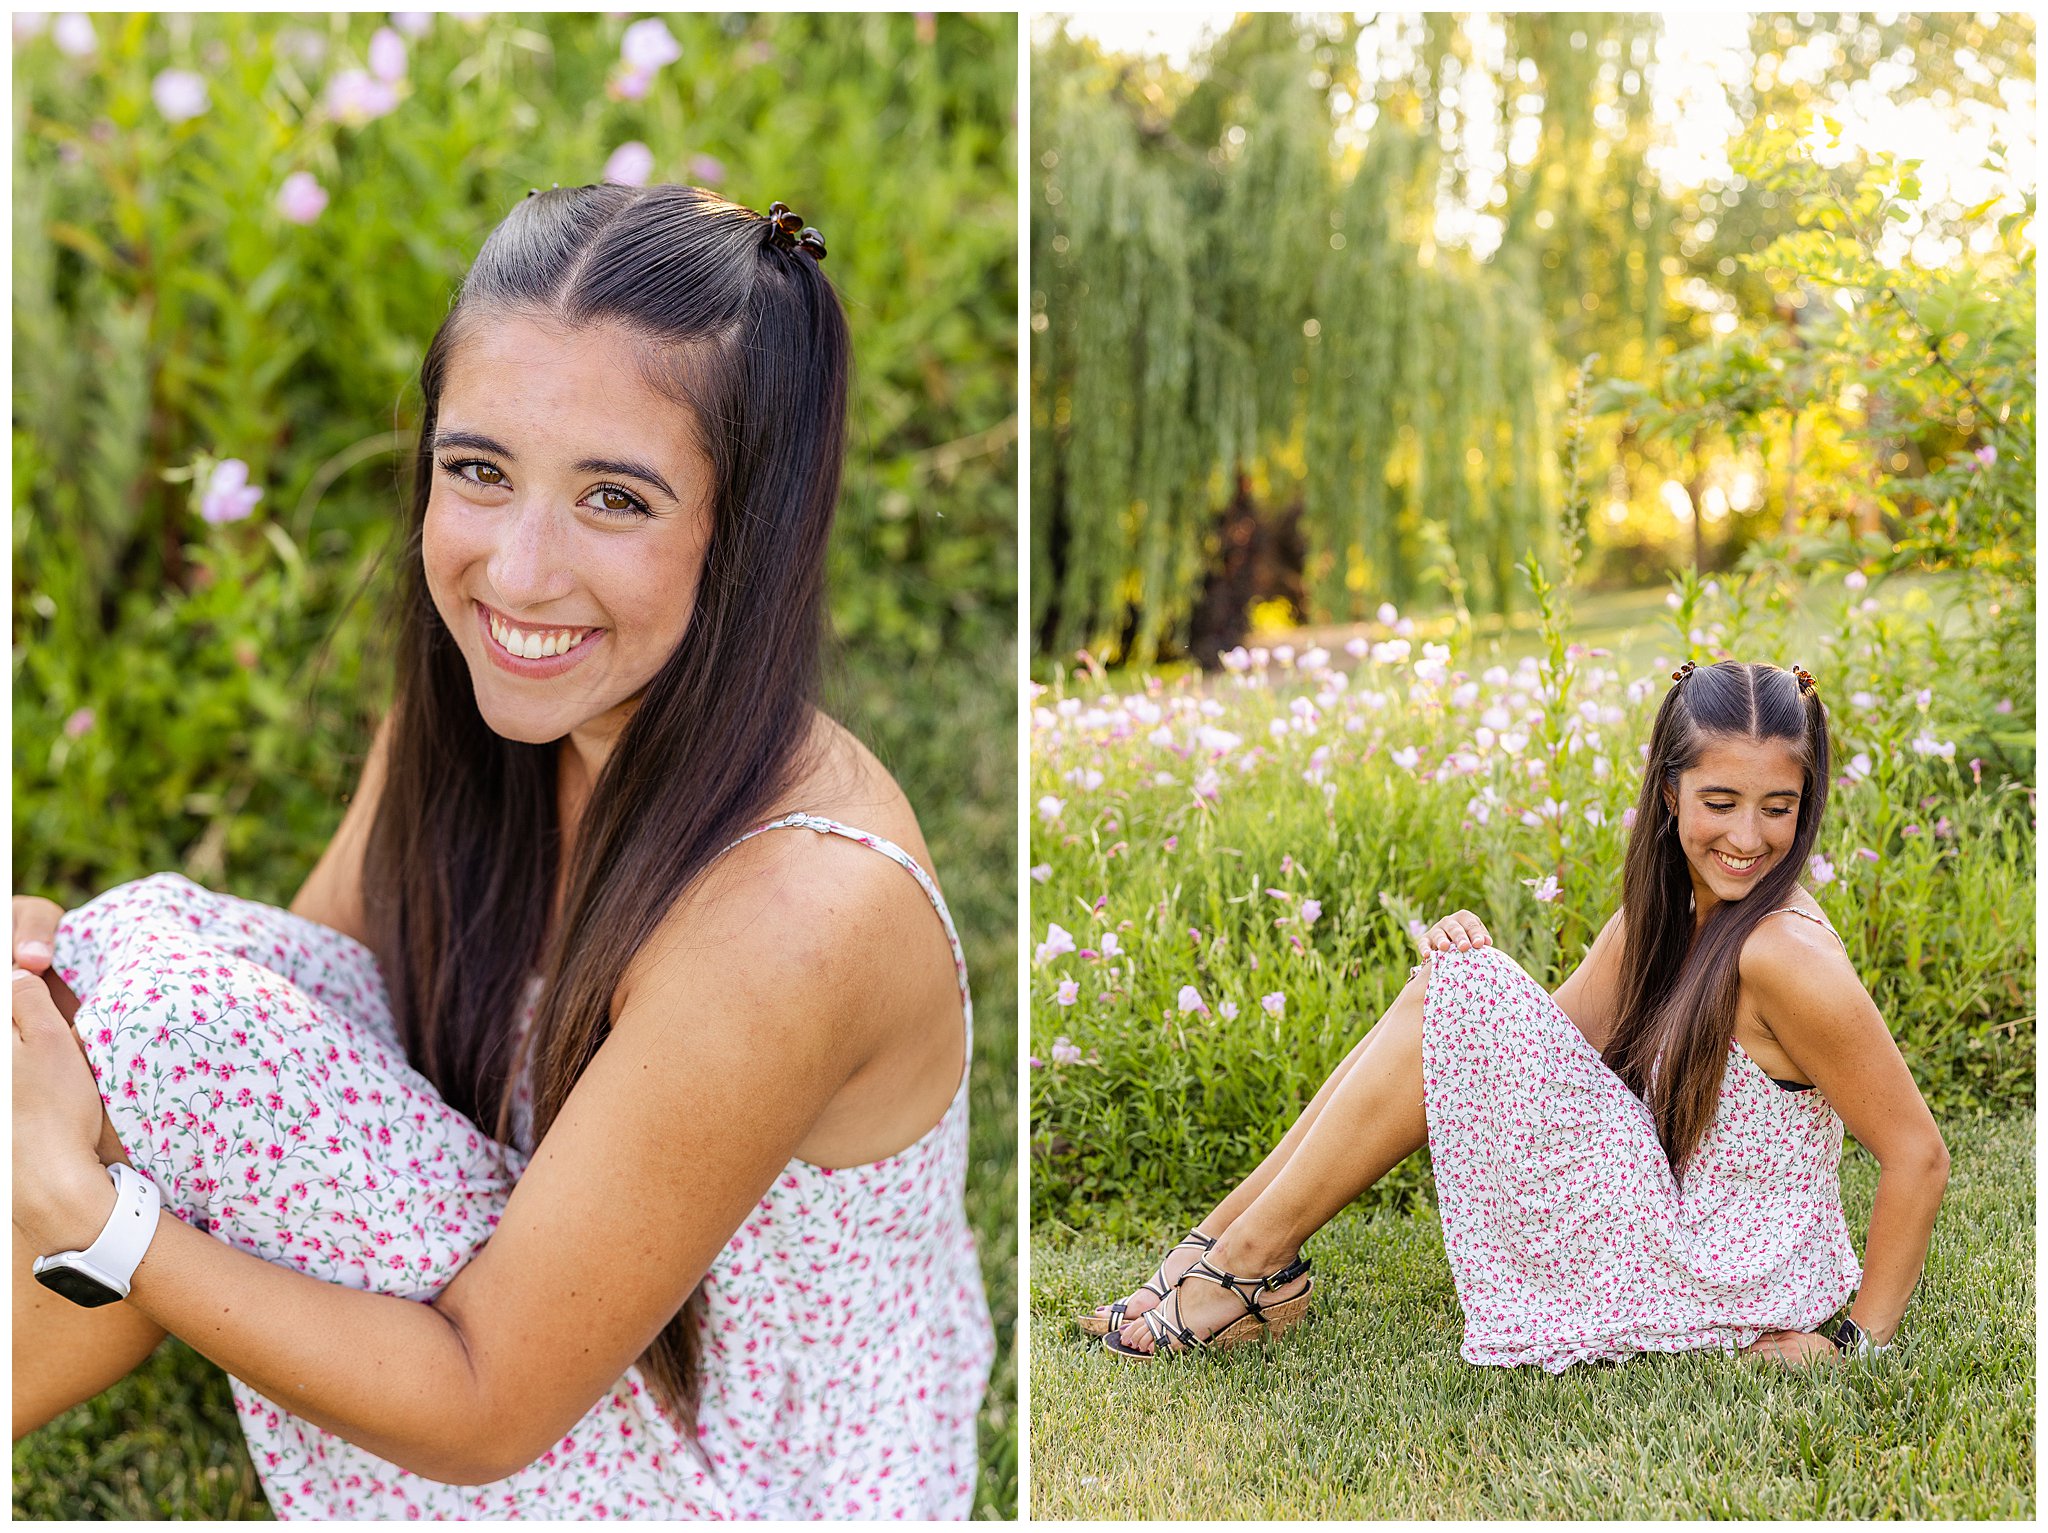 White Ranch Events High School Senior Session Chico California Willow Tree UCLA,